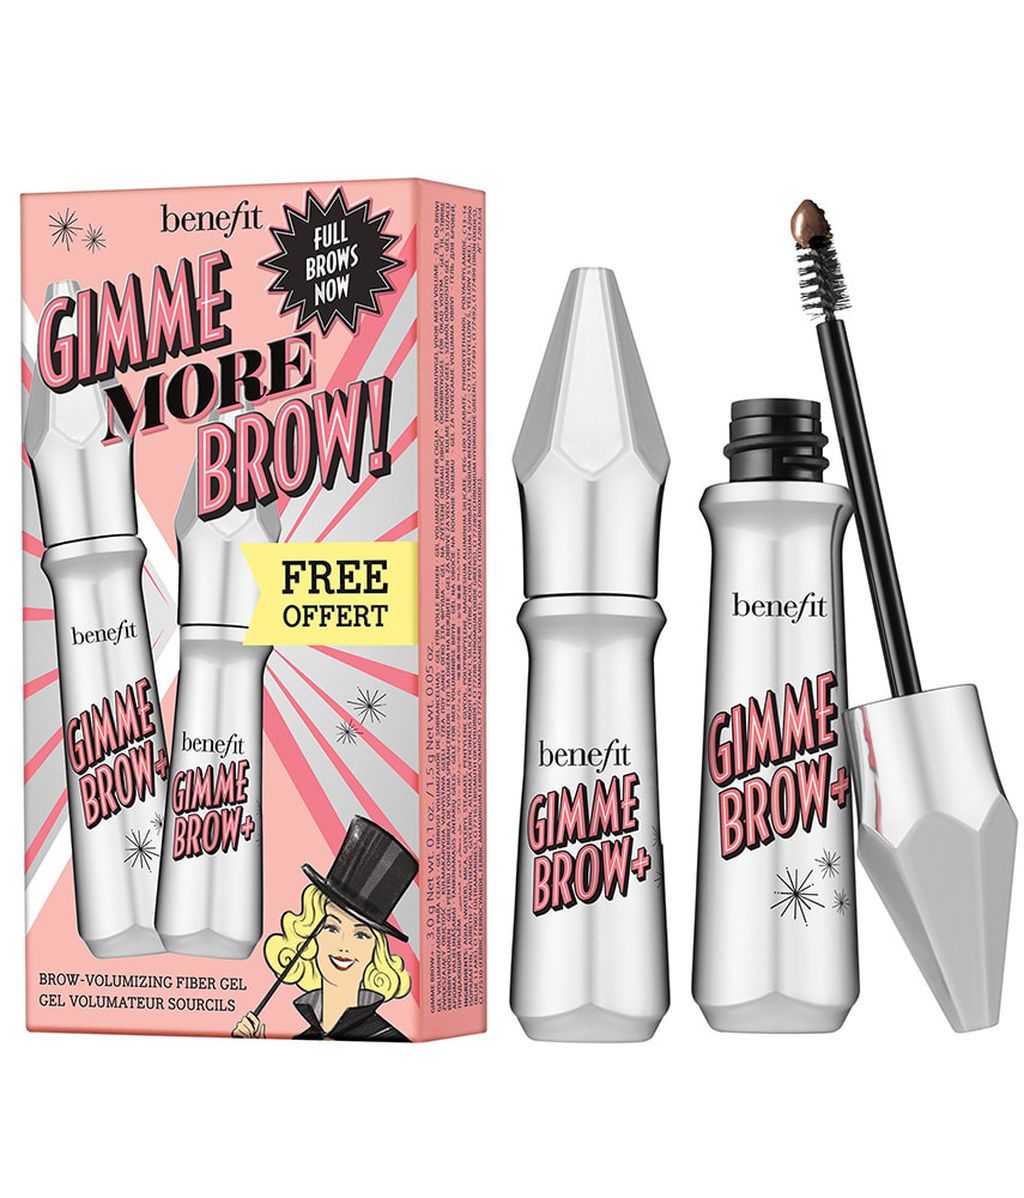 02_Gimme_More_Brow_Styled-benefit